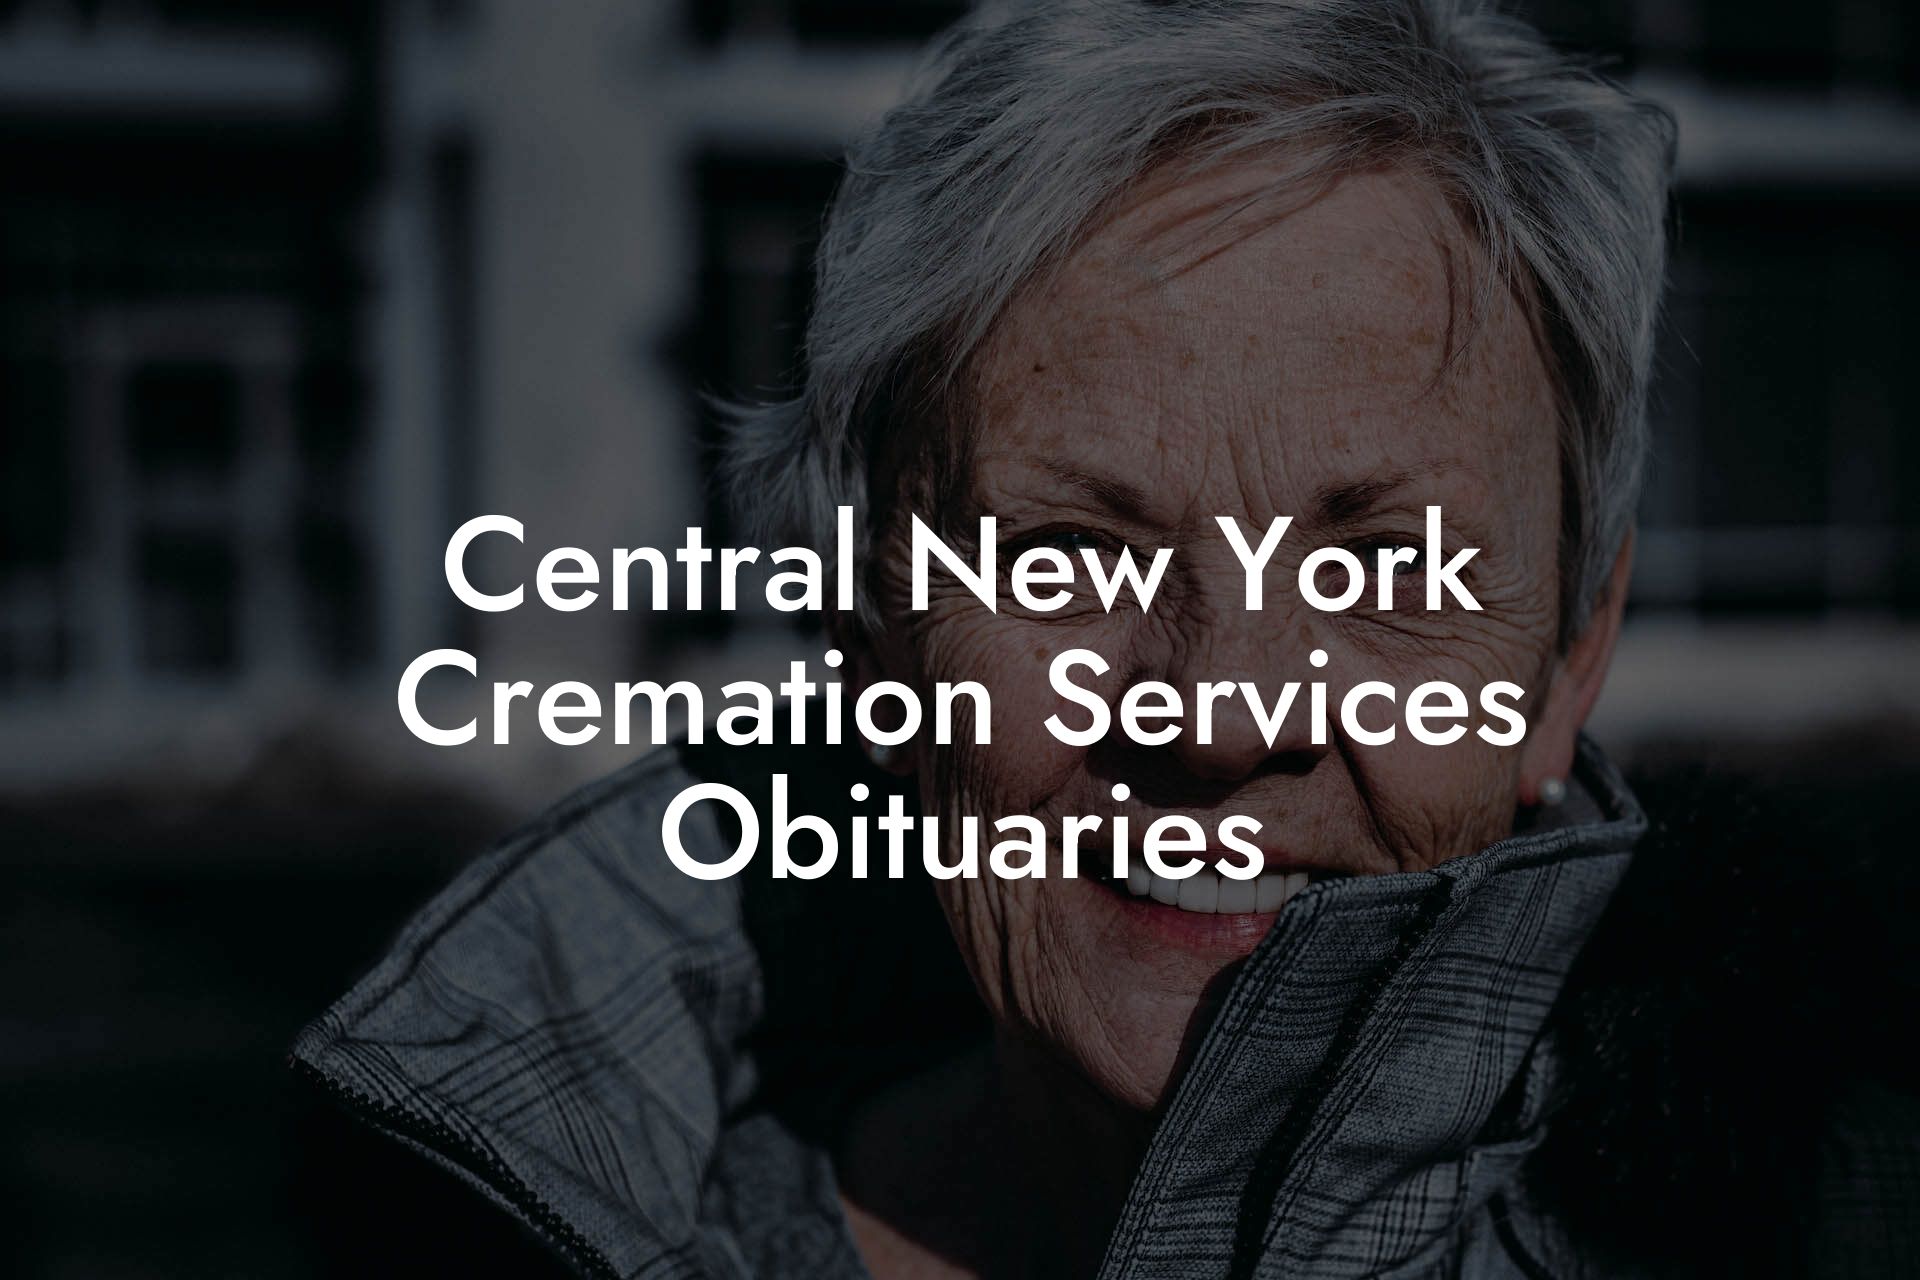 Central New York Cremation Services Obituaries